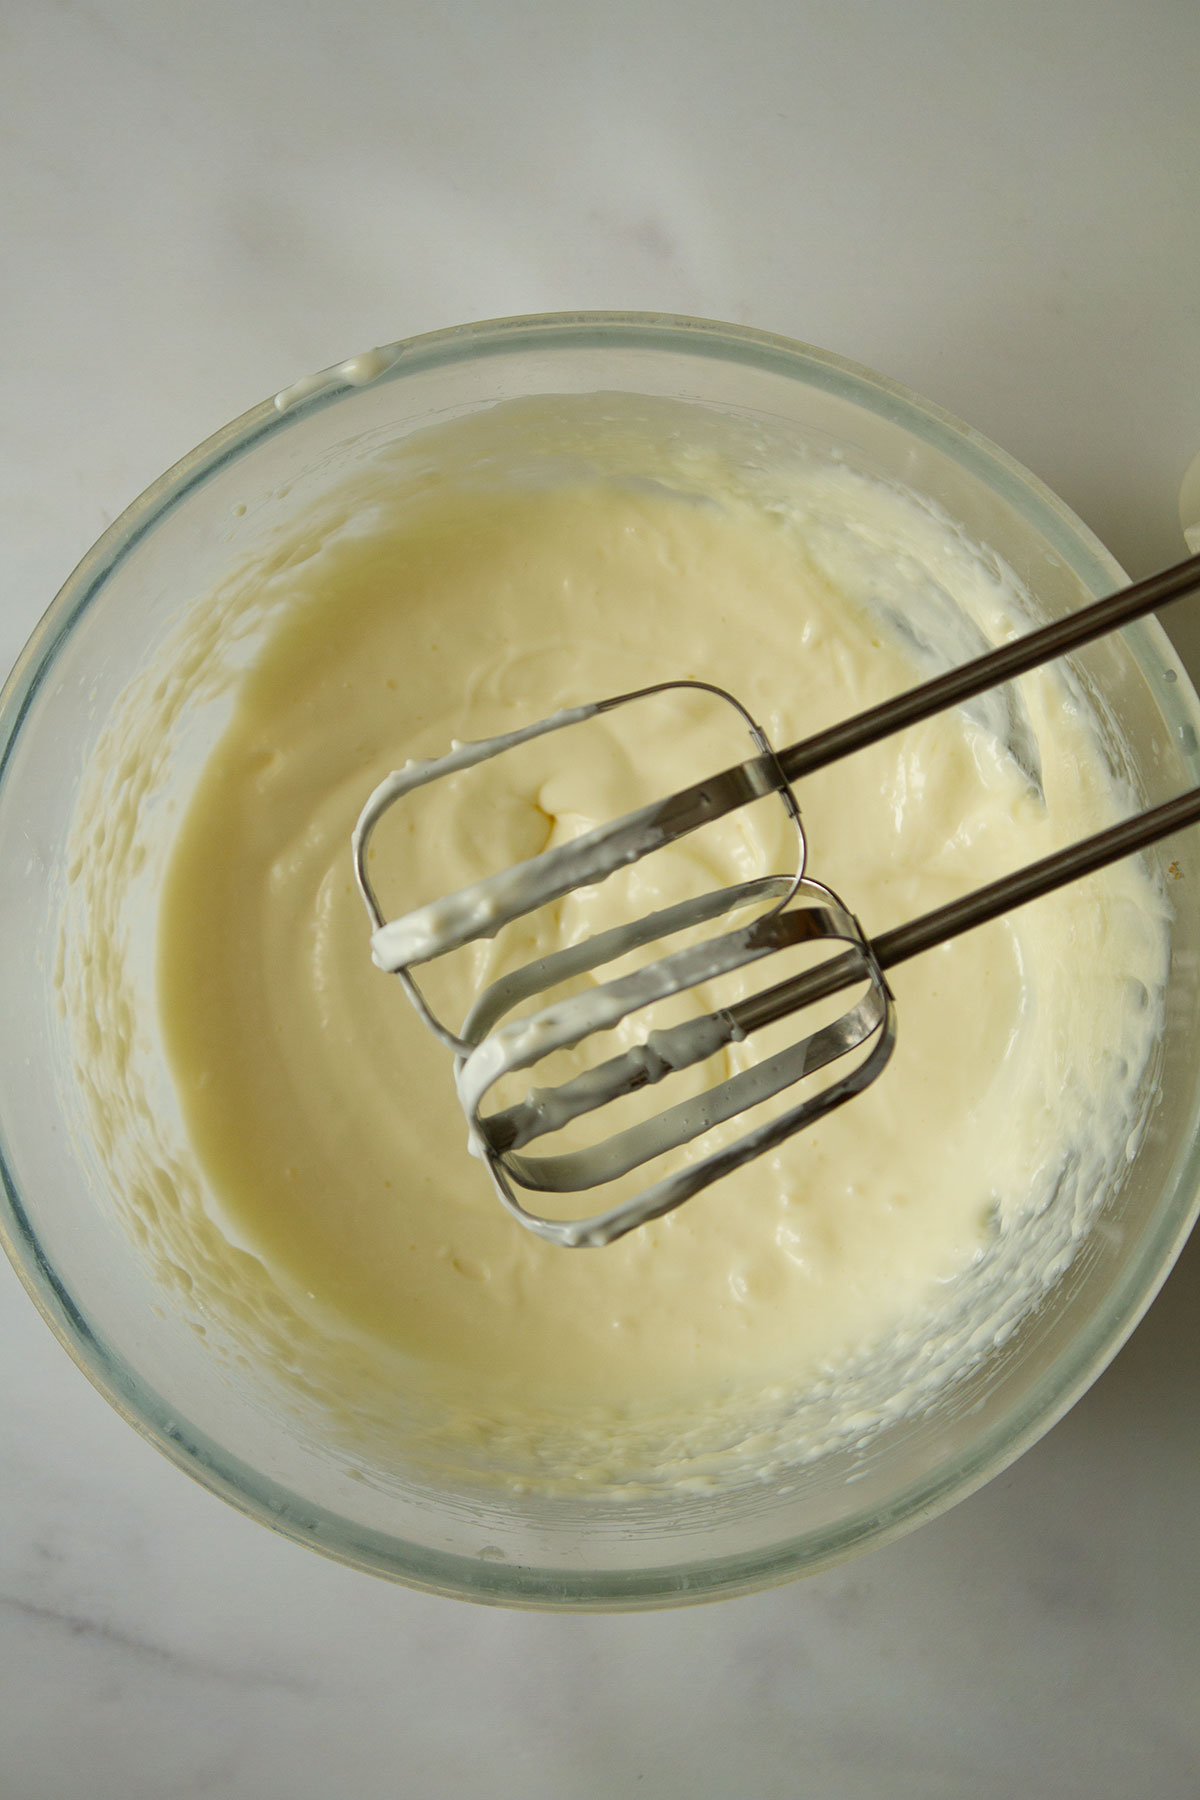 Combining the Philadelphia and condensed milk in a mixing bowl using an electric whisk.